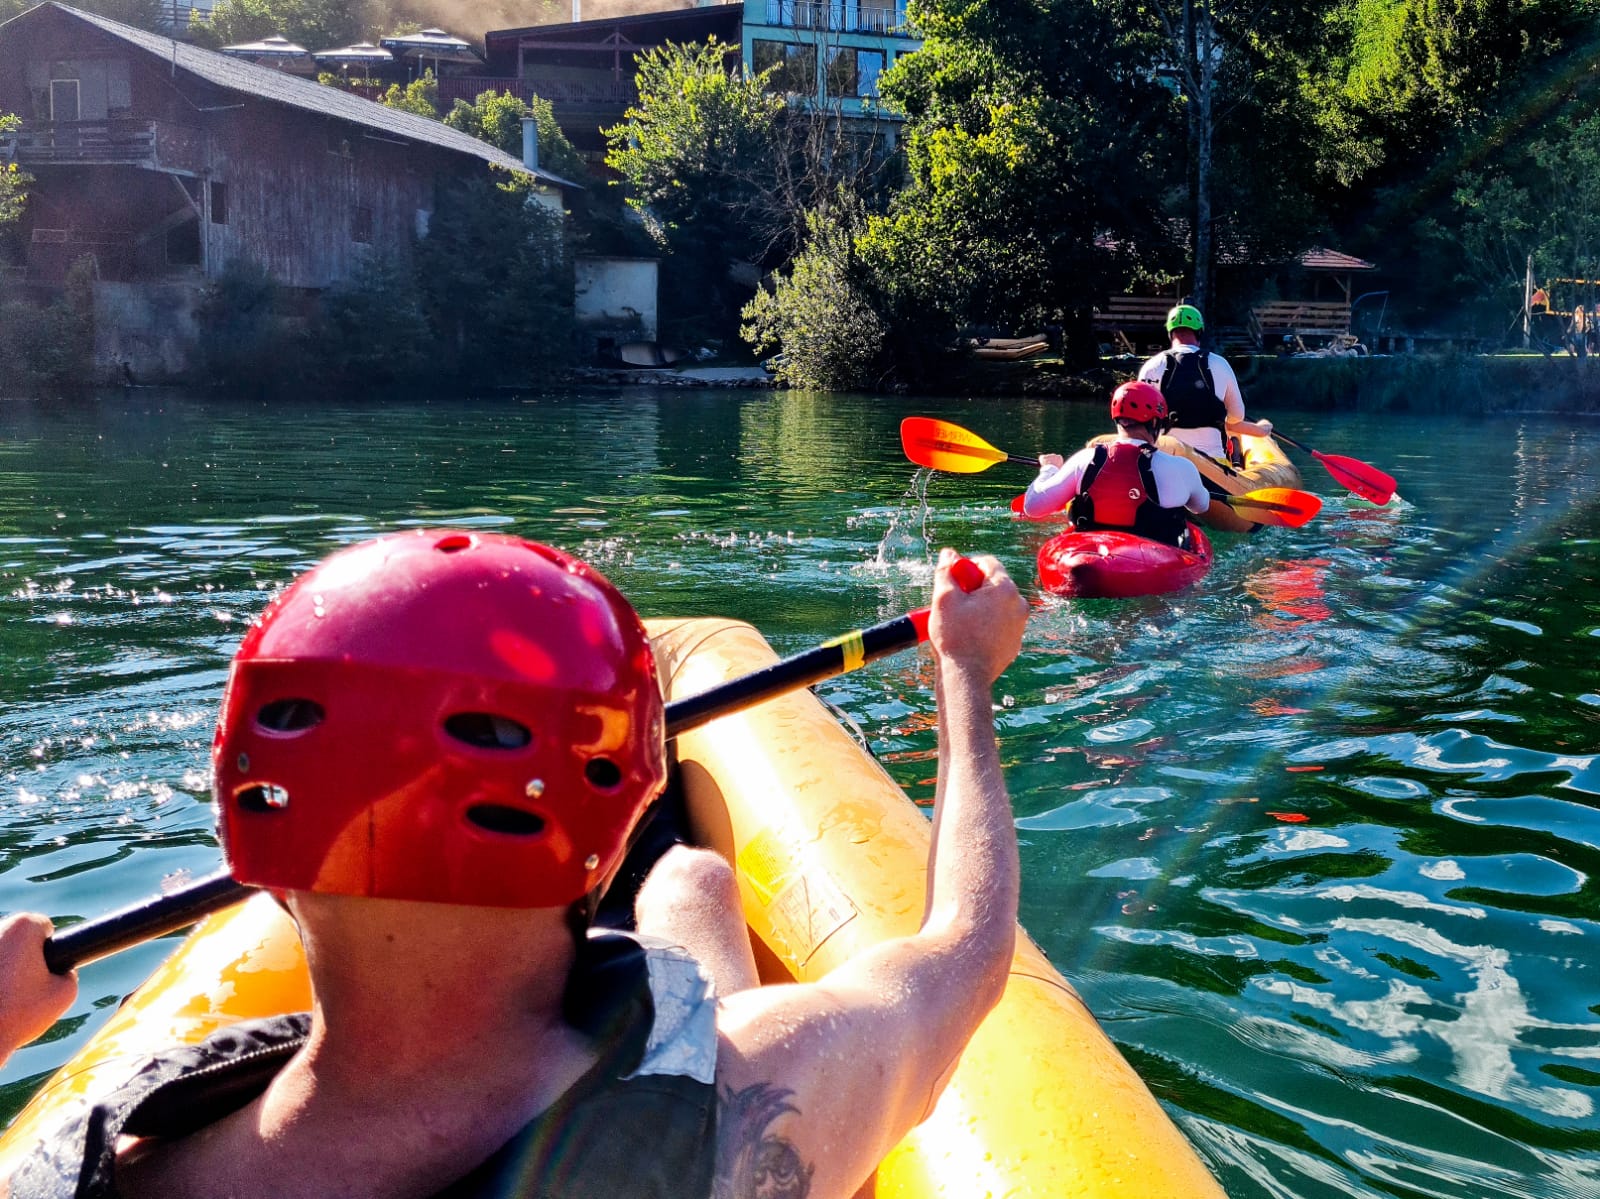 Rafting for the blind for first time on Croatia’s Mrežnica river